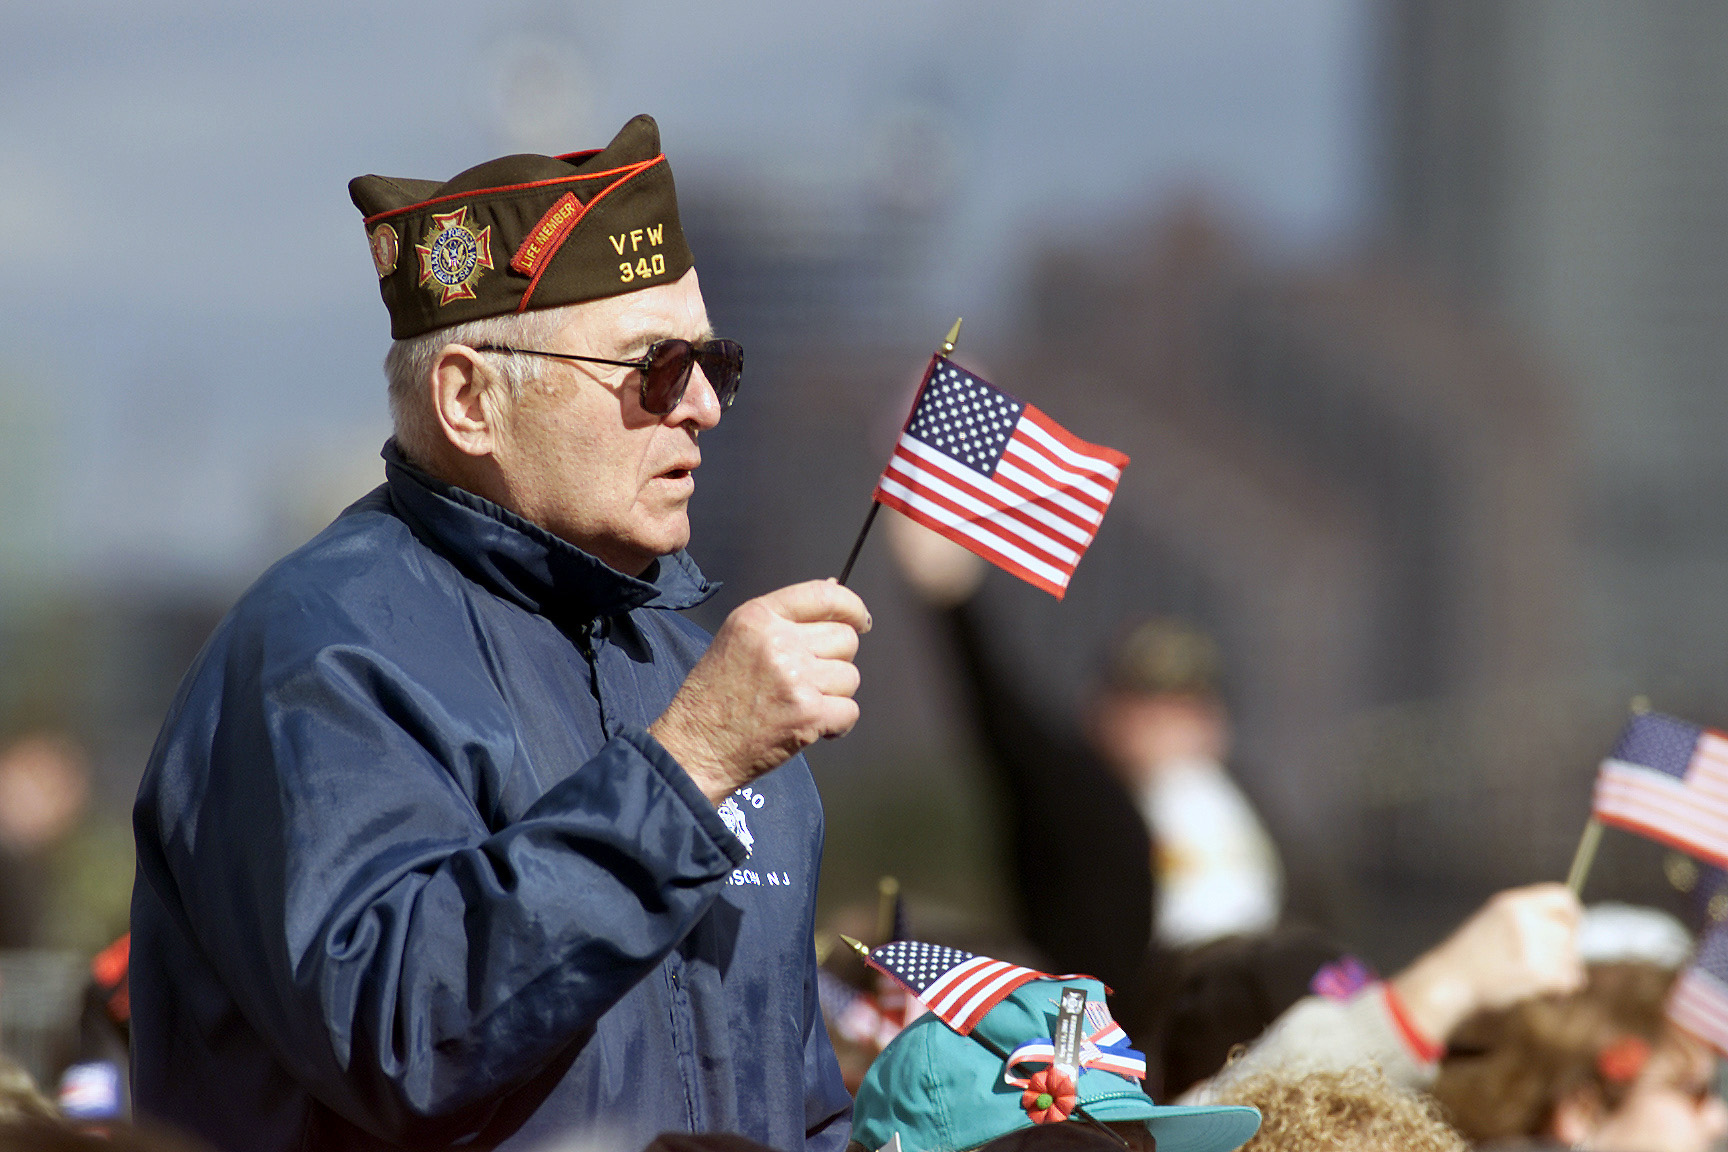 Photo showing an Armed Forces Veteran holding a small handheld American flag